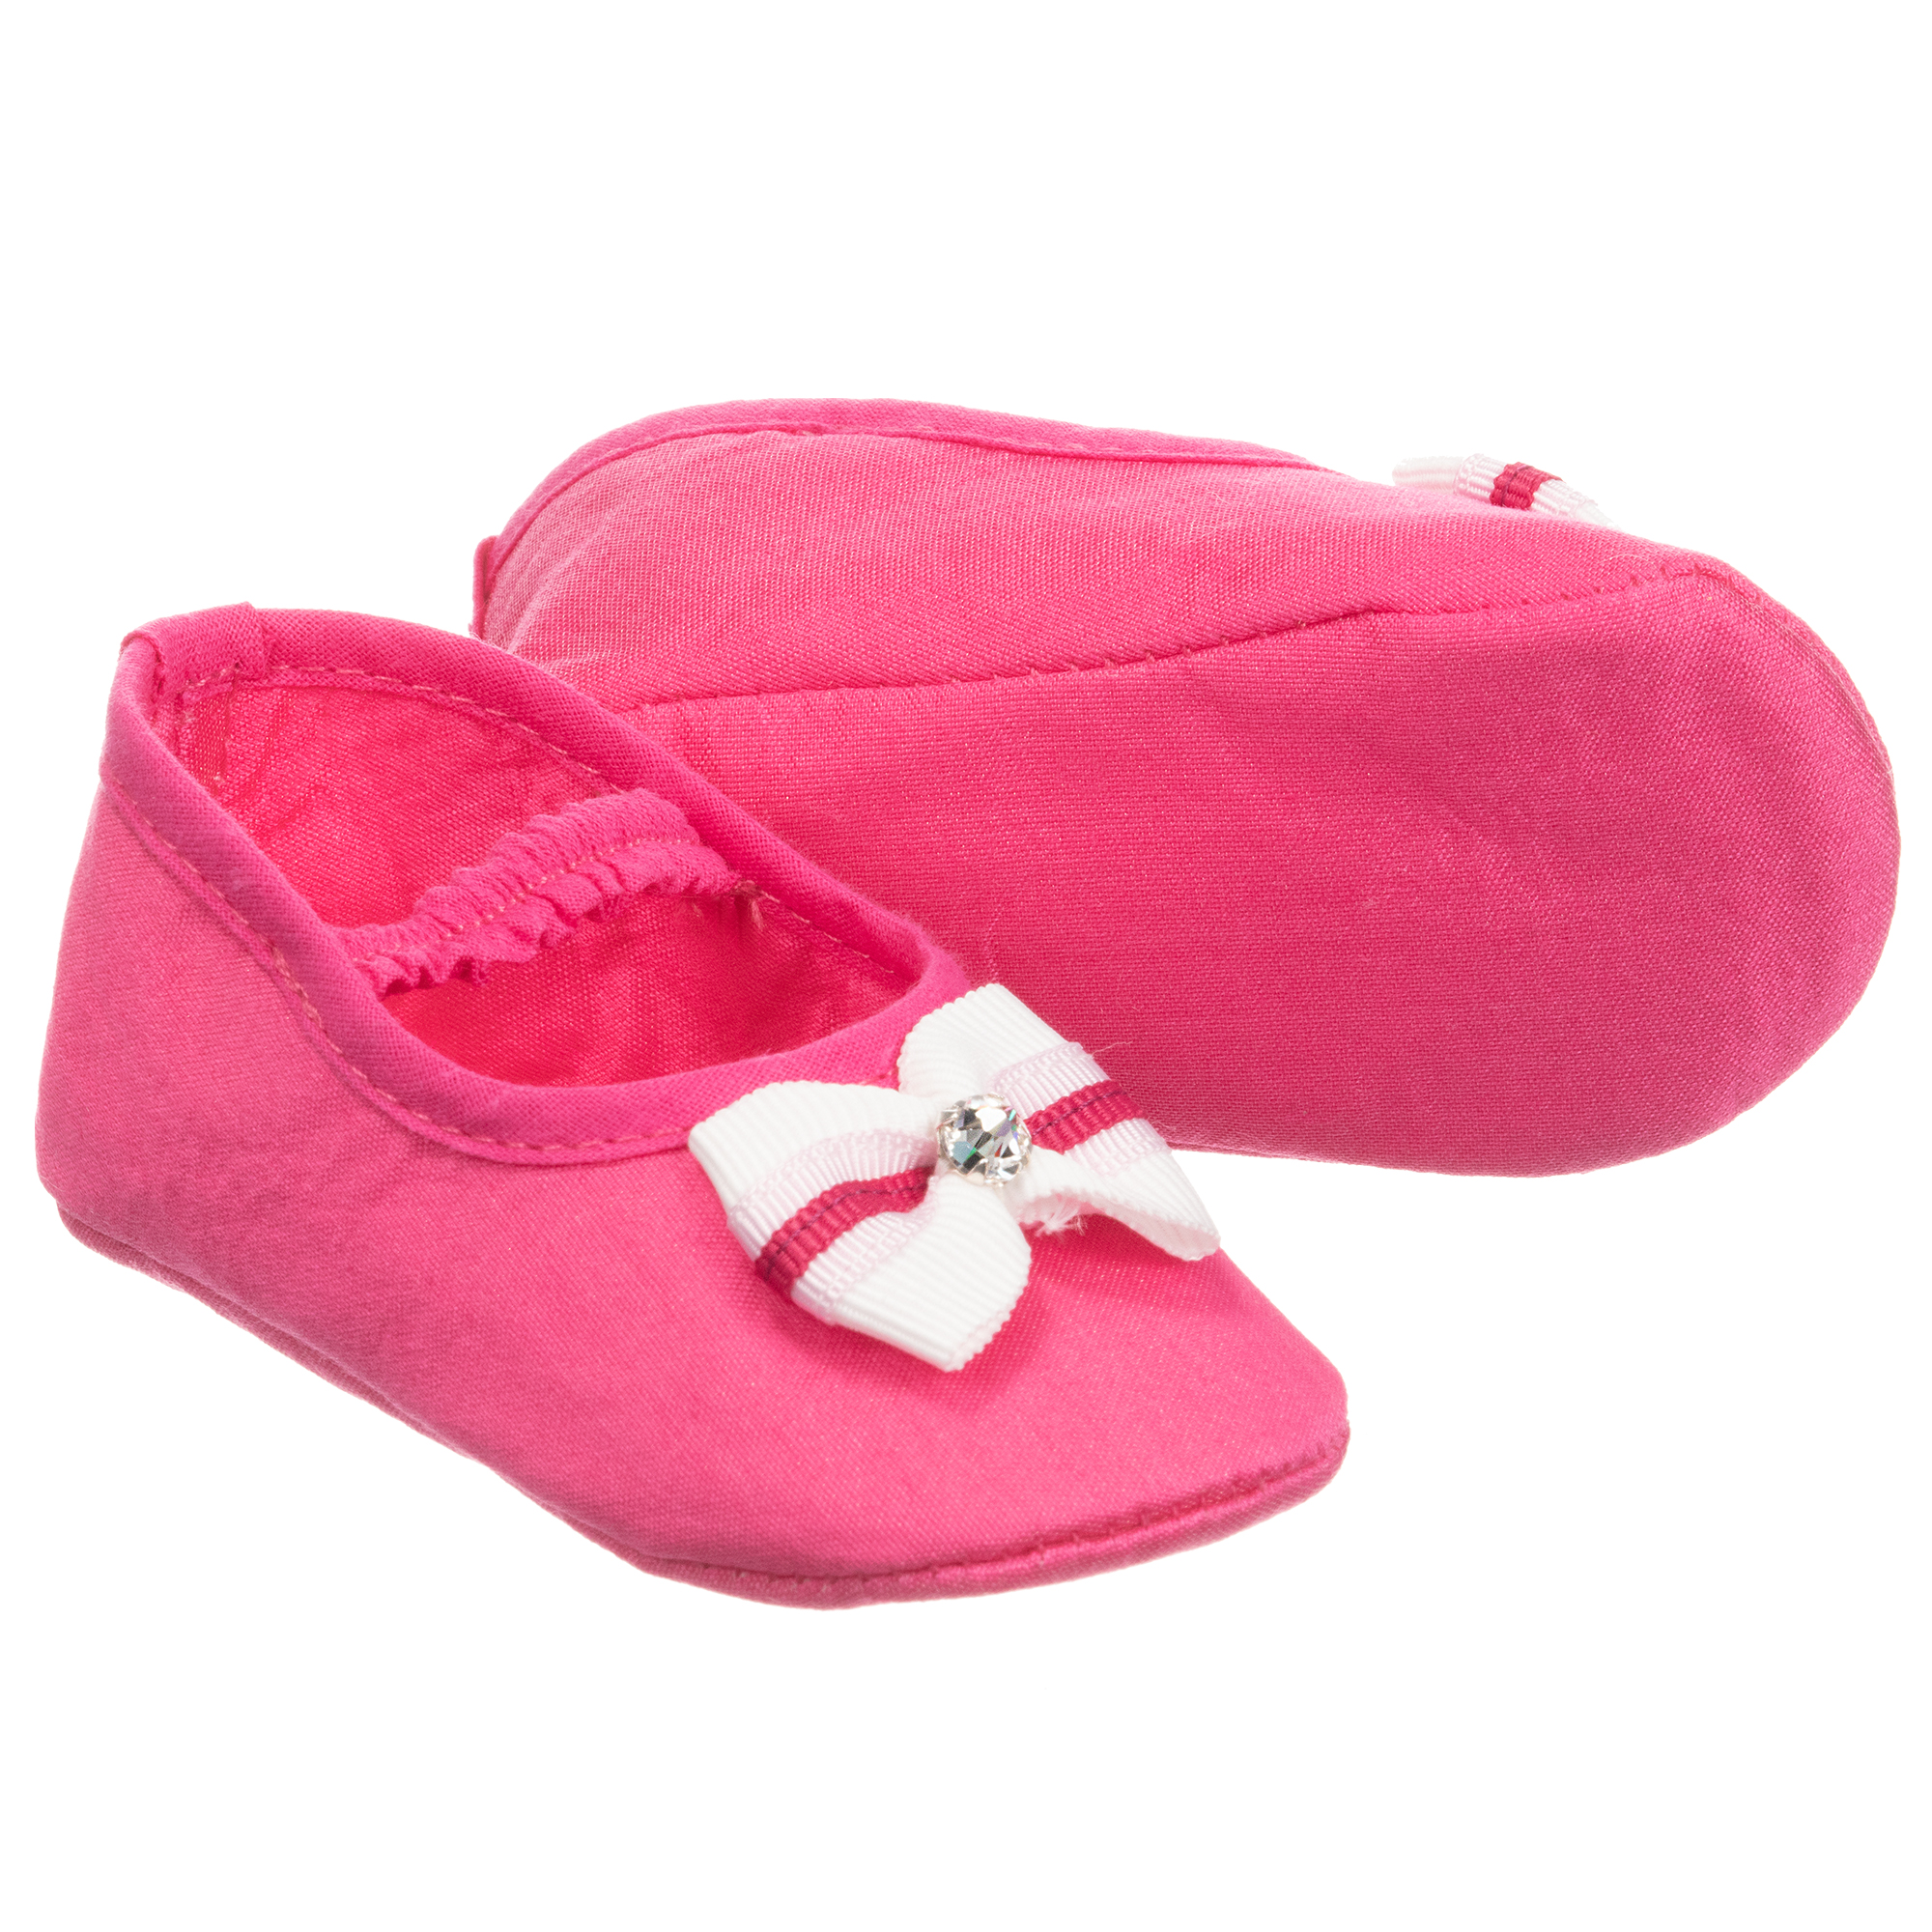 pink shoes for baby girl